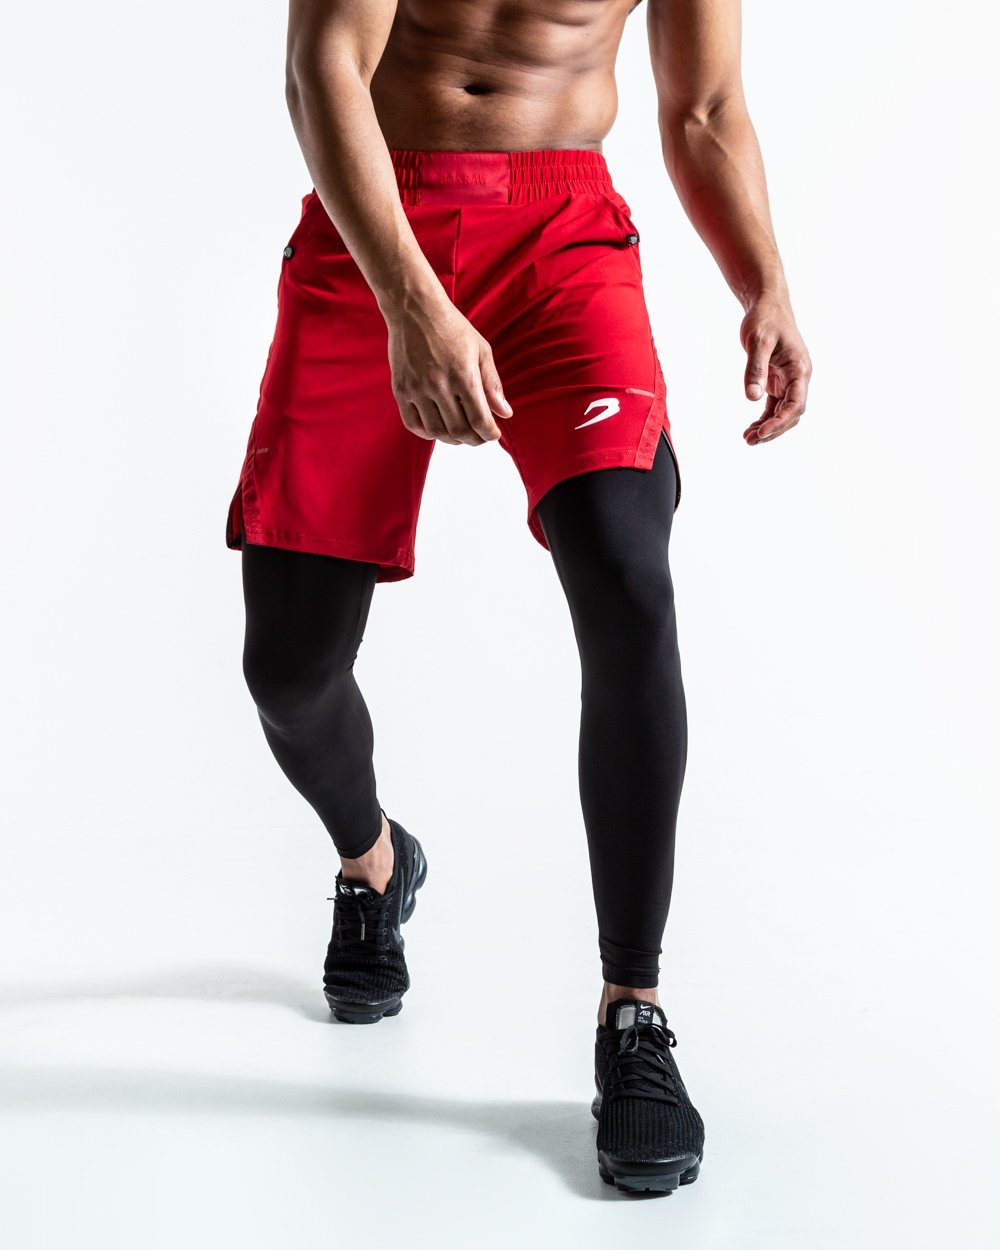 PEP SHORTS (2-IN-1 TRAINING TIGHTS) - RED